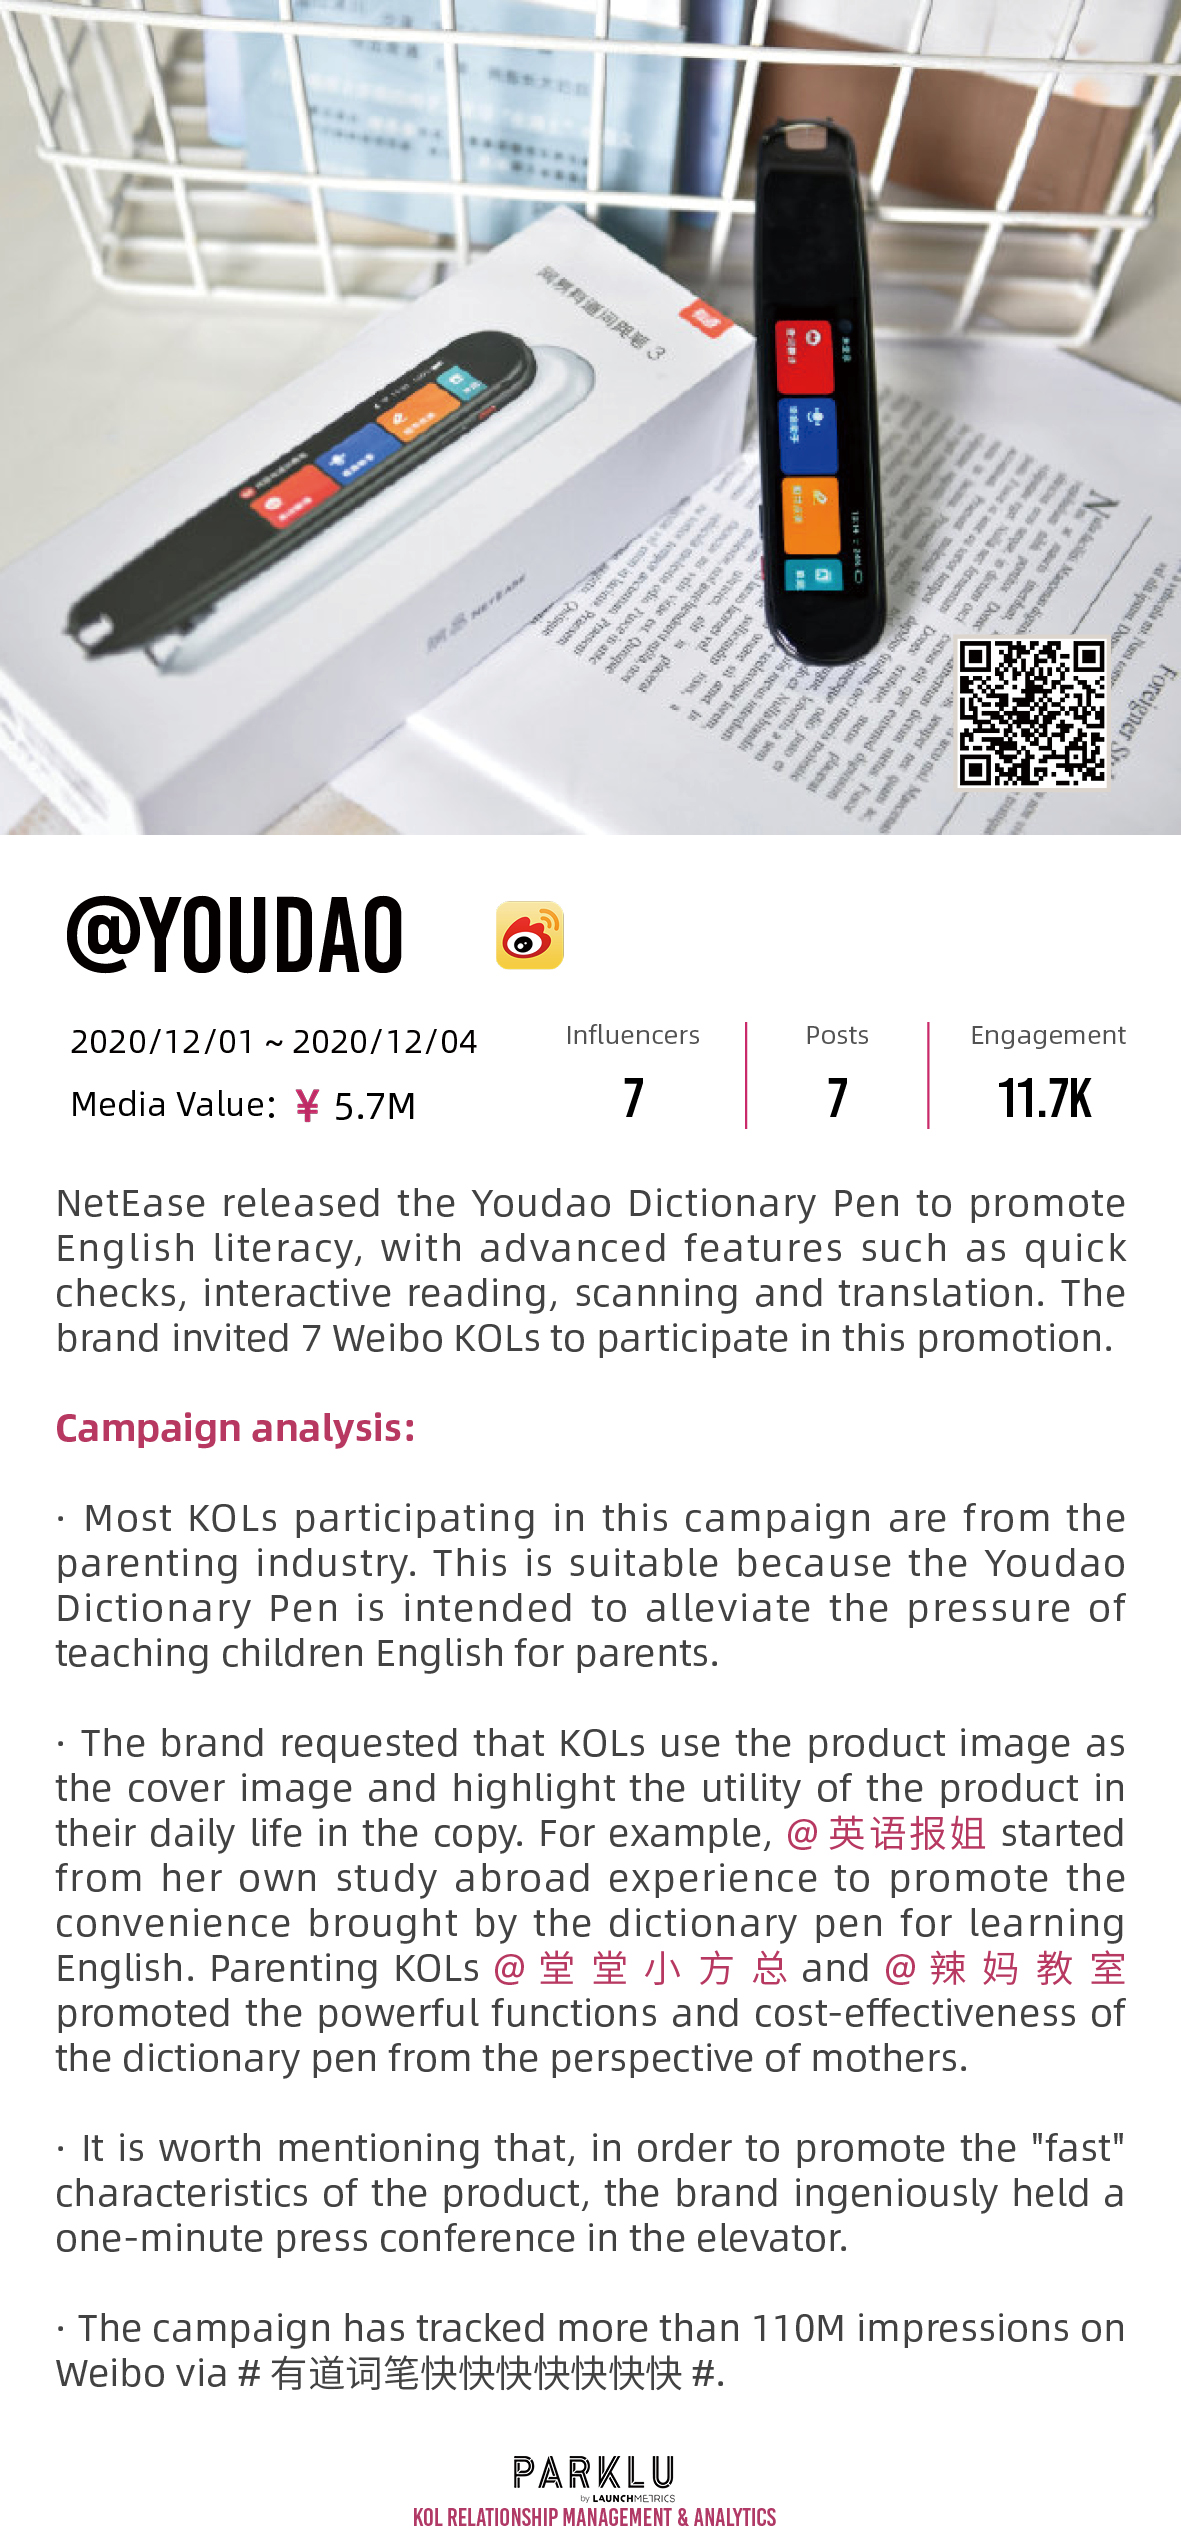 NetEase released the Youdao Dictionary Pen to promote English literacy, with advanced features such as quick checks